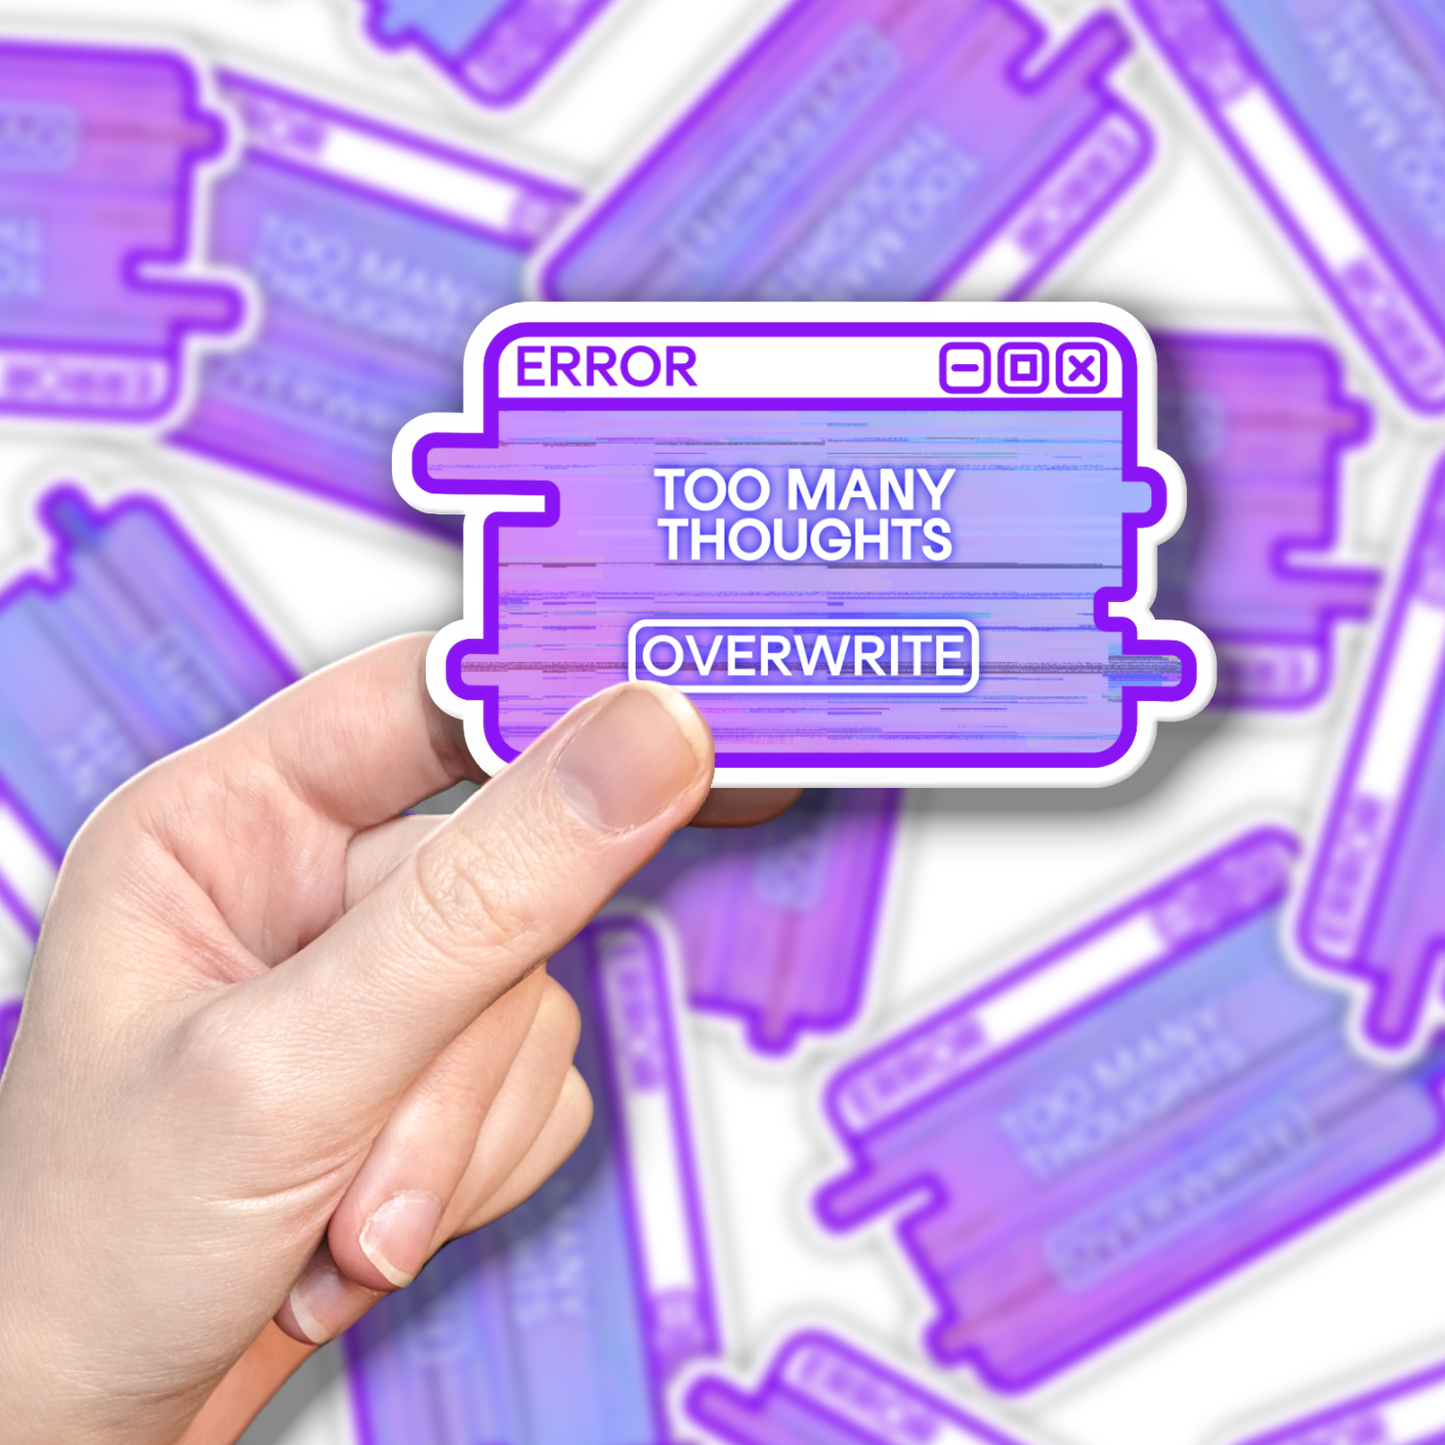 "Too Many Thoughts" System Message Sticker